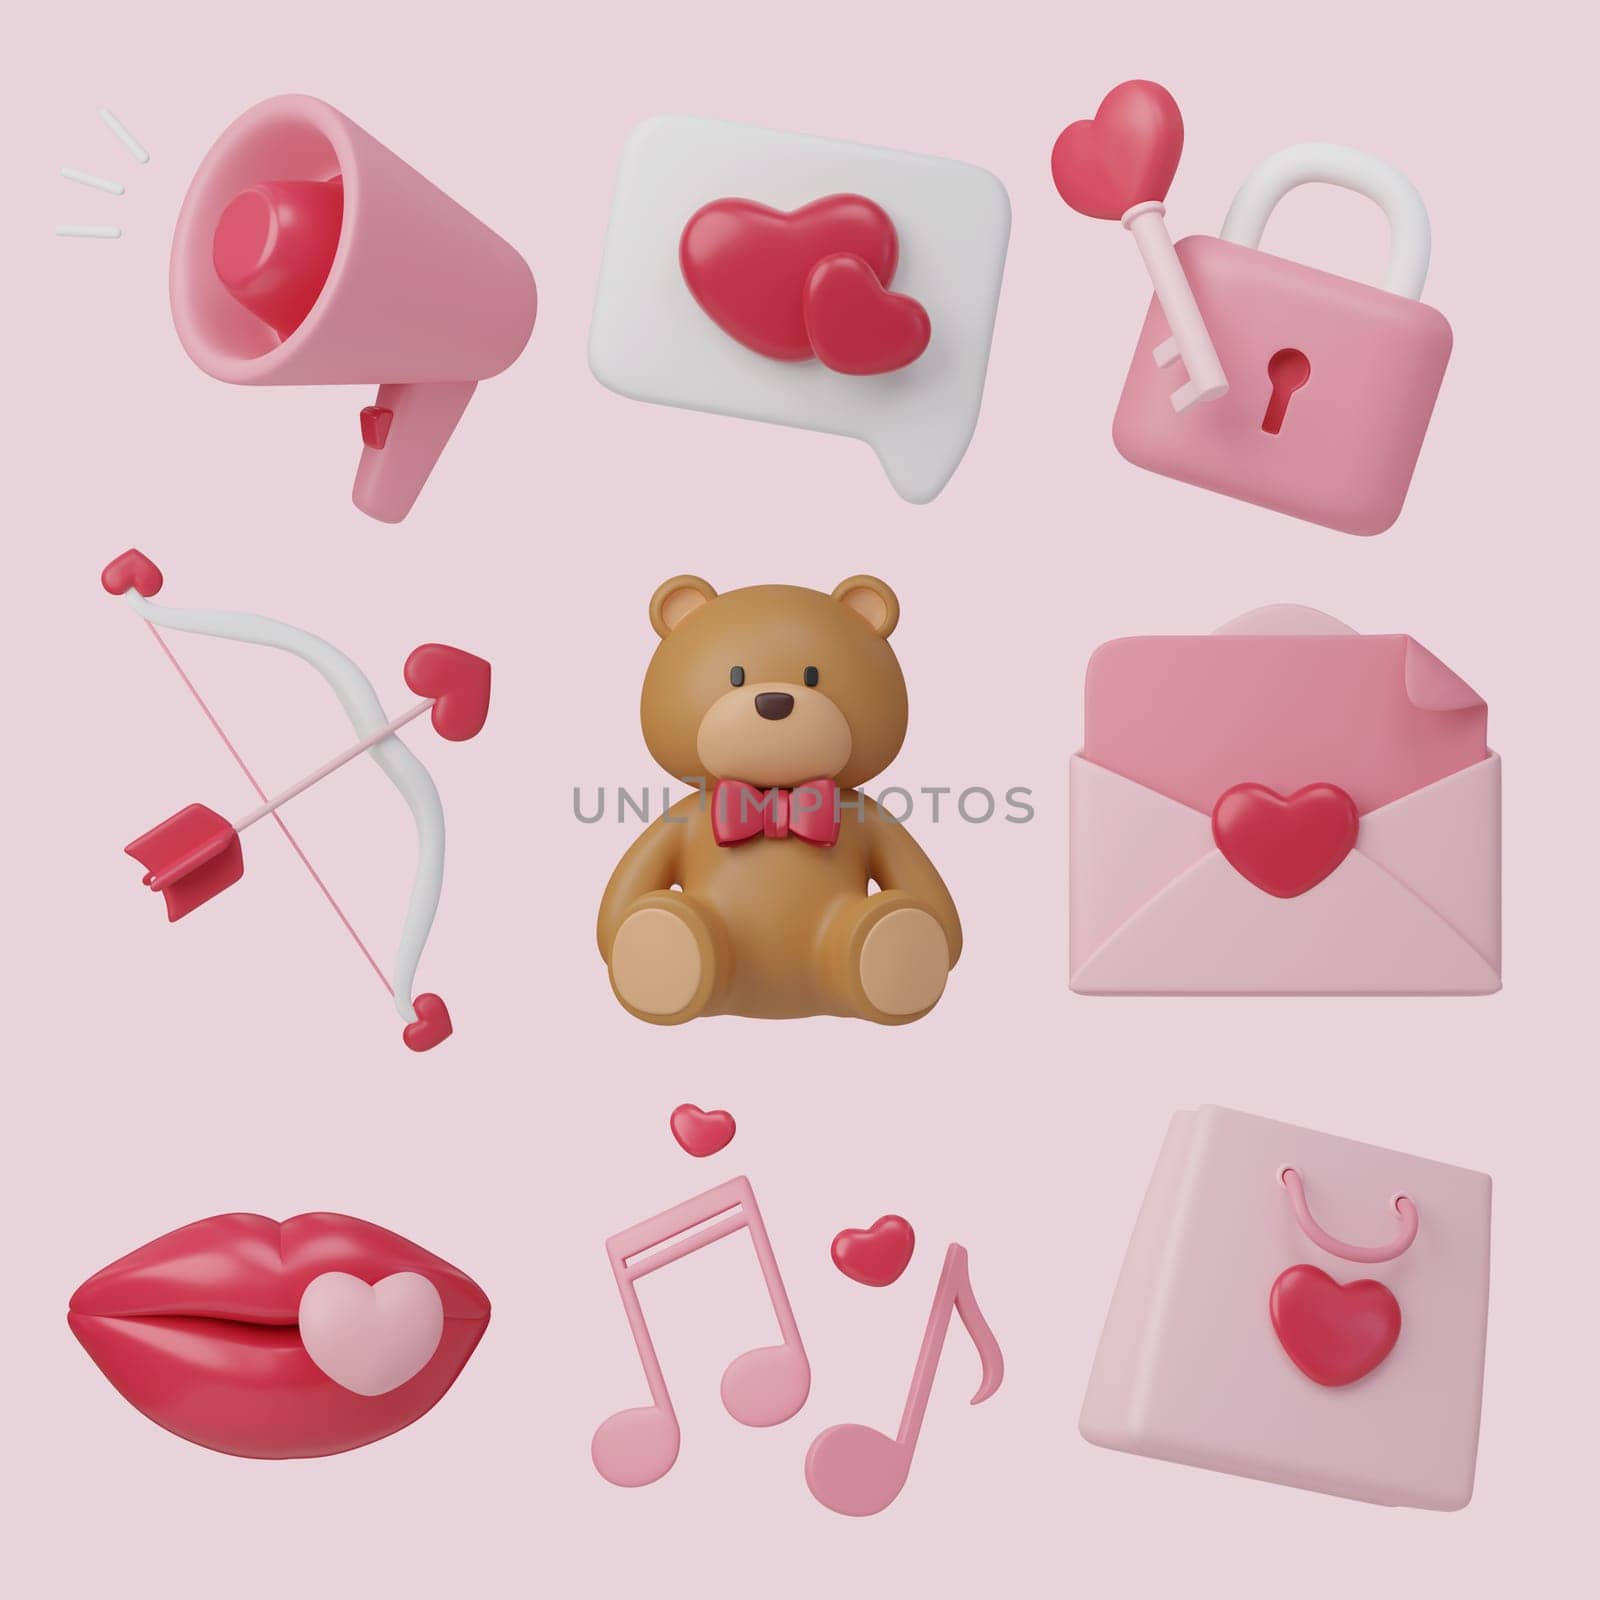 3d icon set of Valentine's day ,Hearts, sweet chocolate and gifts, Valentine's Day Concept.3d rendering illustration. Clipping path. by meepiangraphic